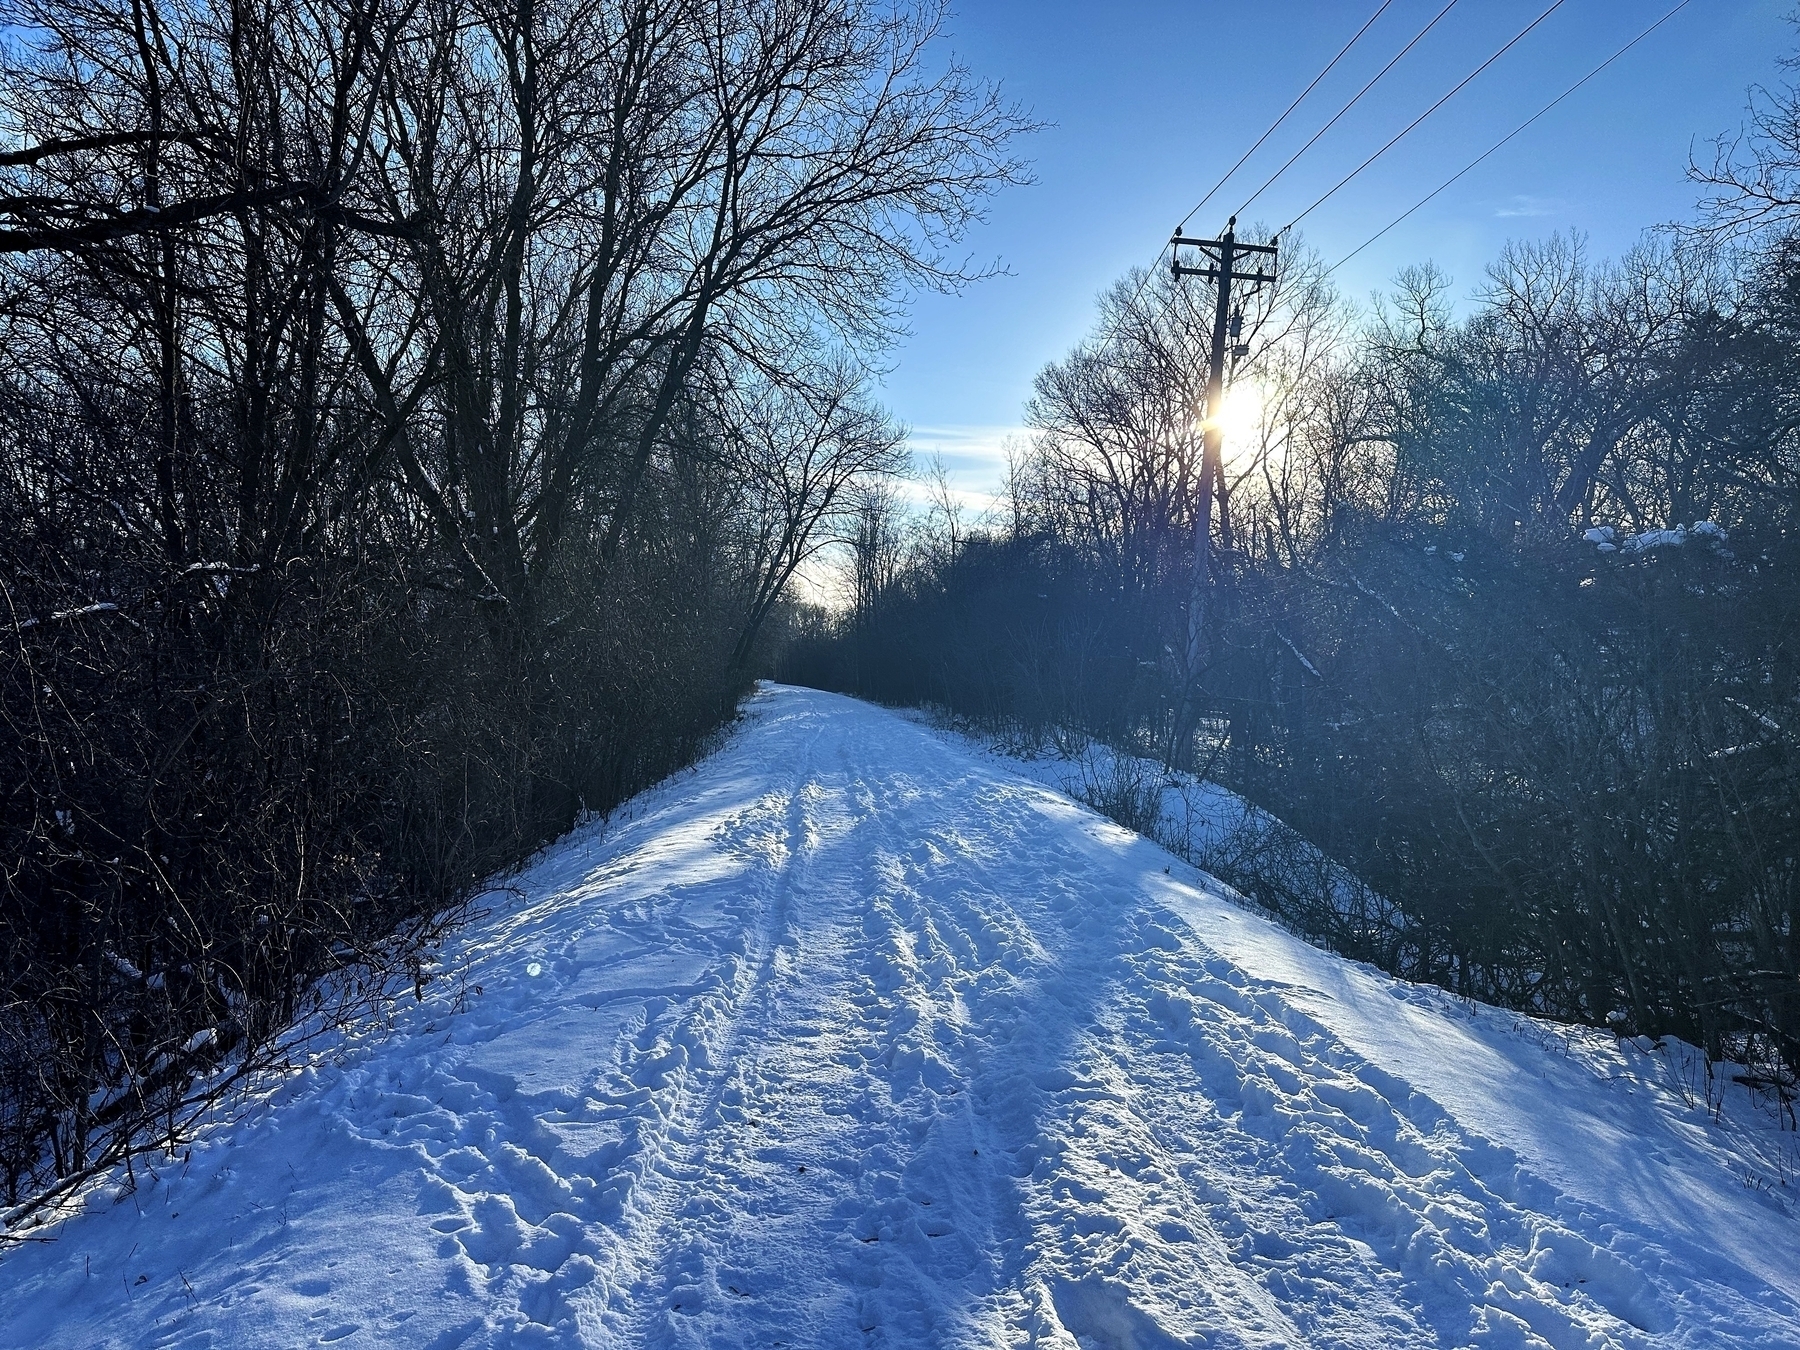 A snow-covered path stretches between bare trees under a clear blue sky, with a sun peeking through branches and power lines overhead.